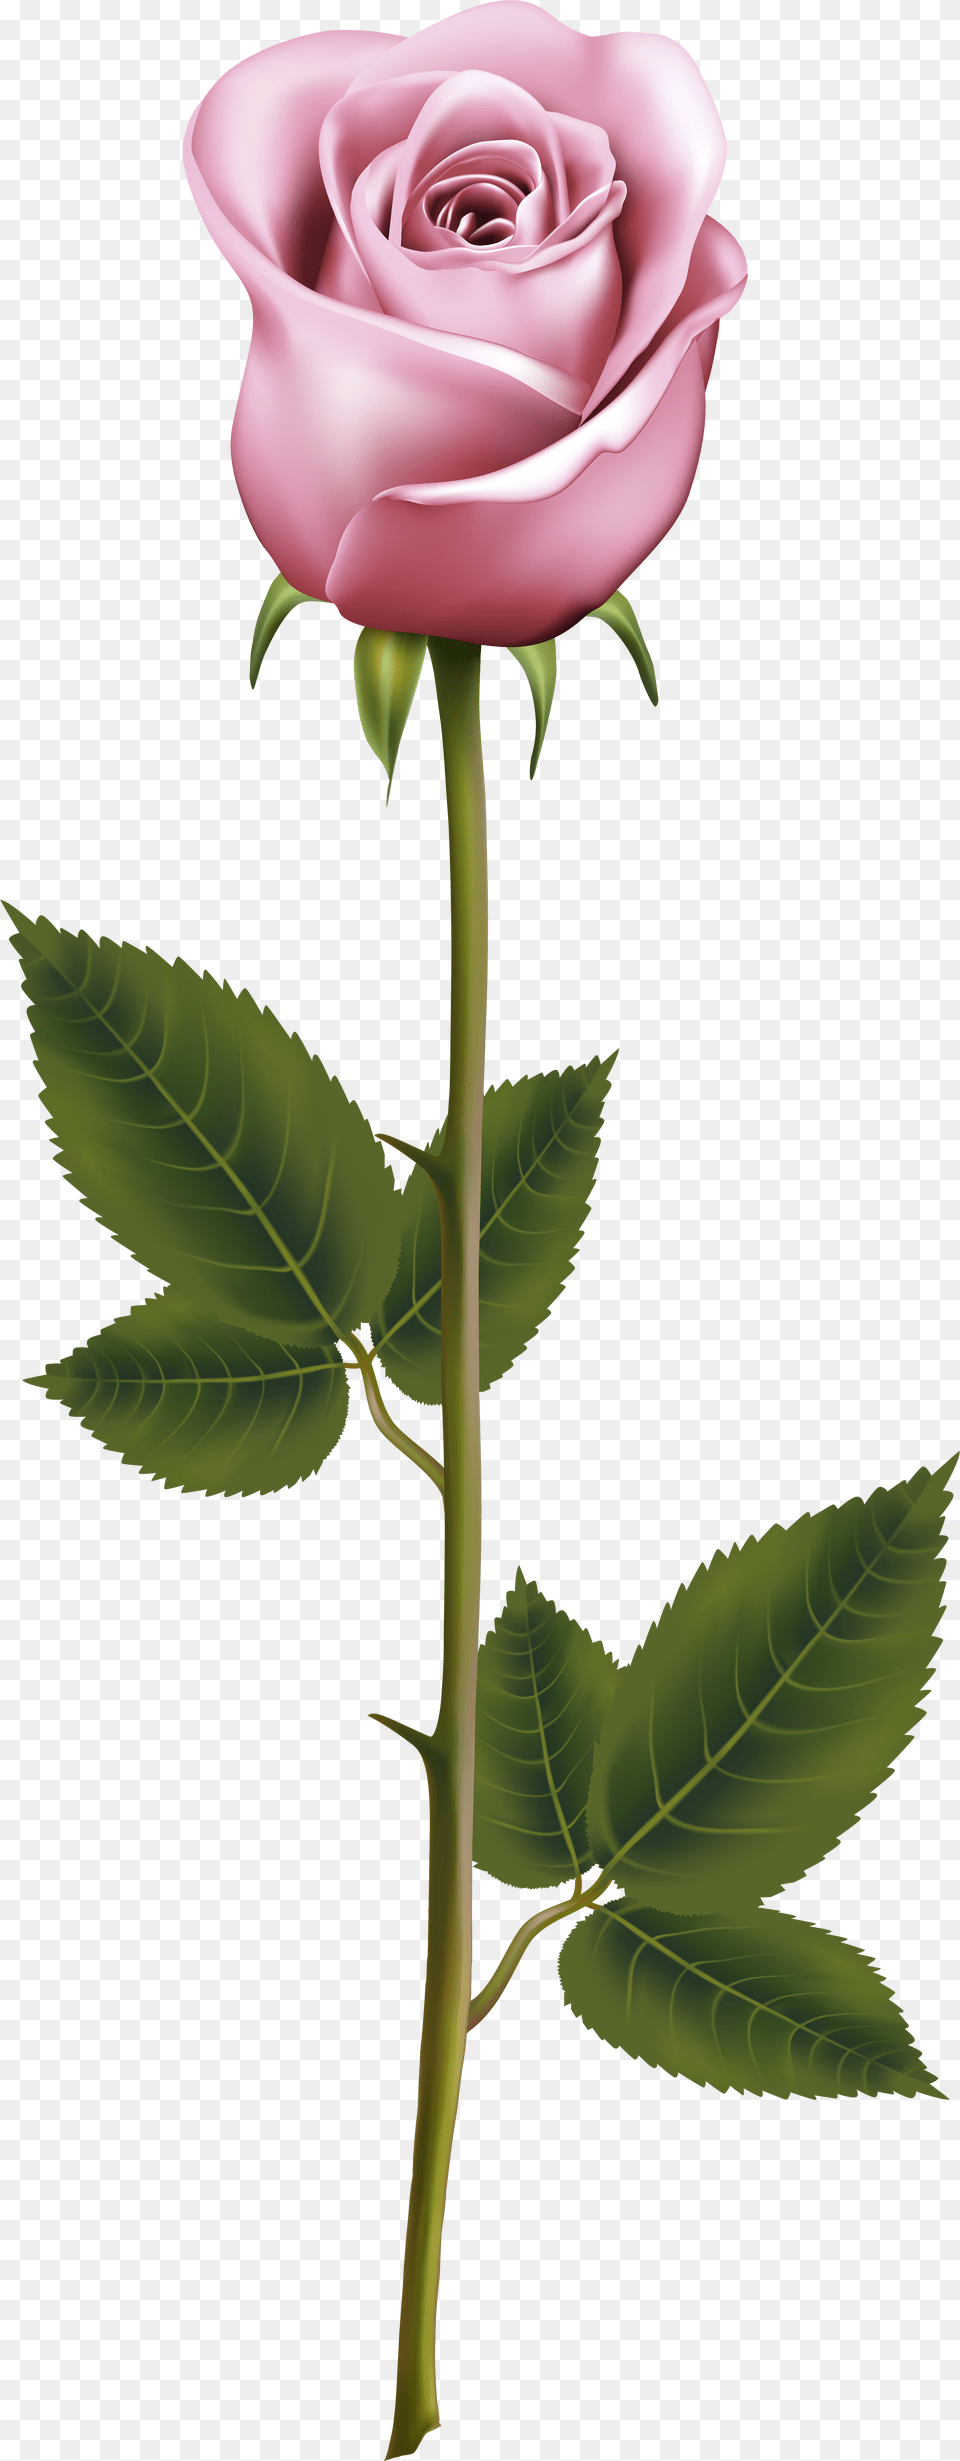 Flower Stems Picture Rose With Stem Png